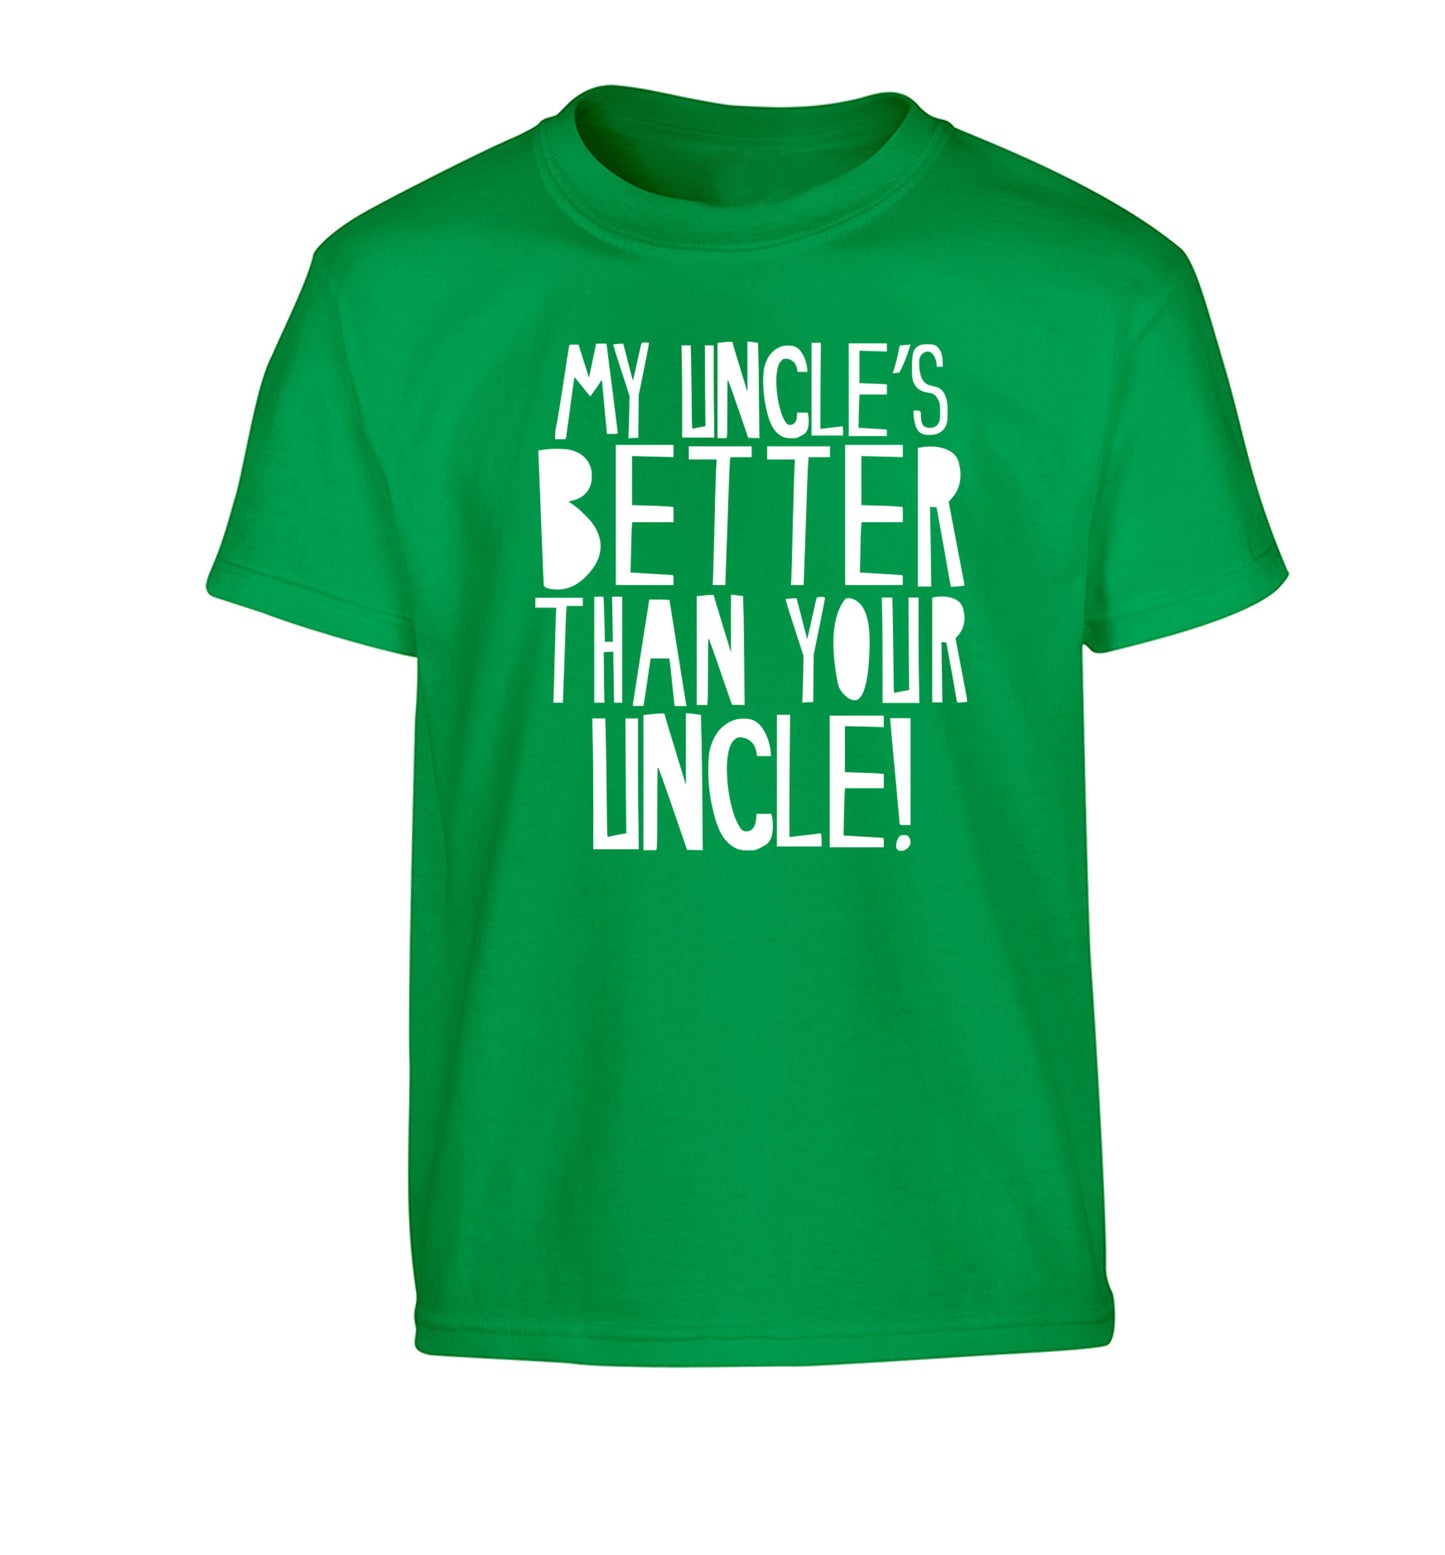 My uncles better than your uncle Children's green Tshirt 12-13 Years